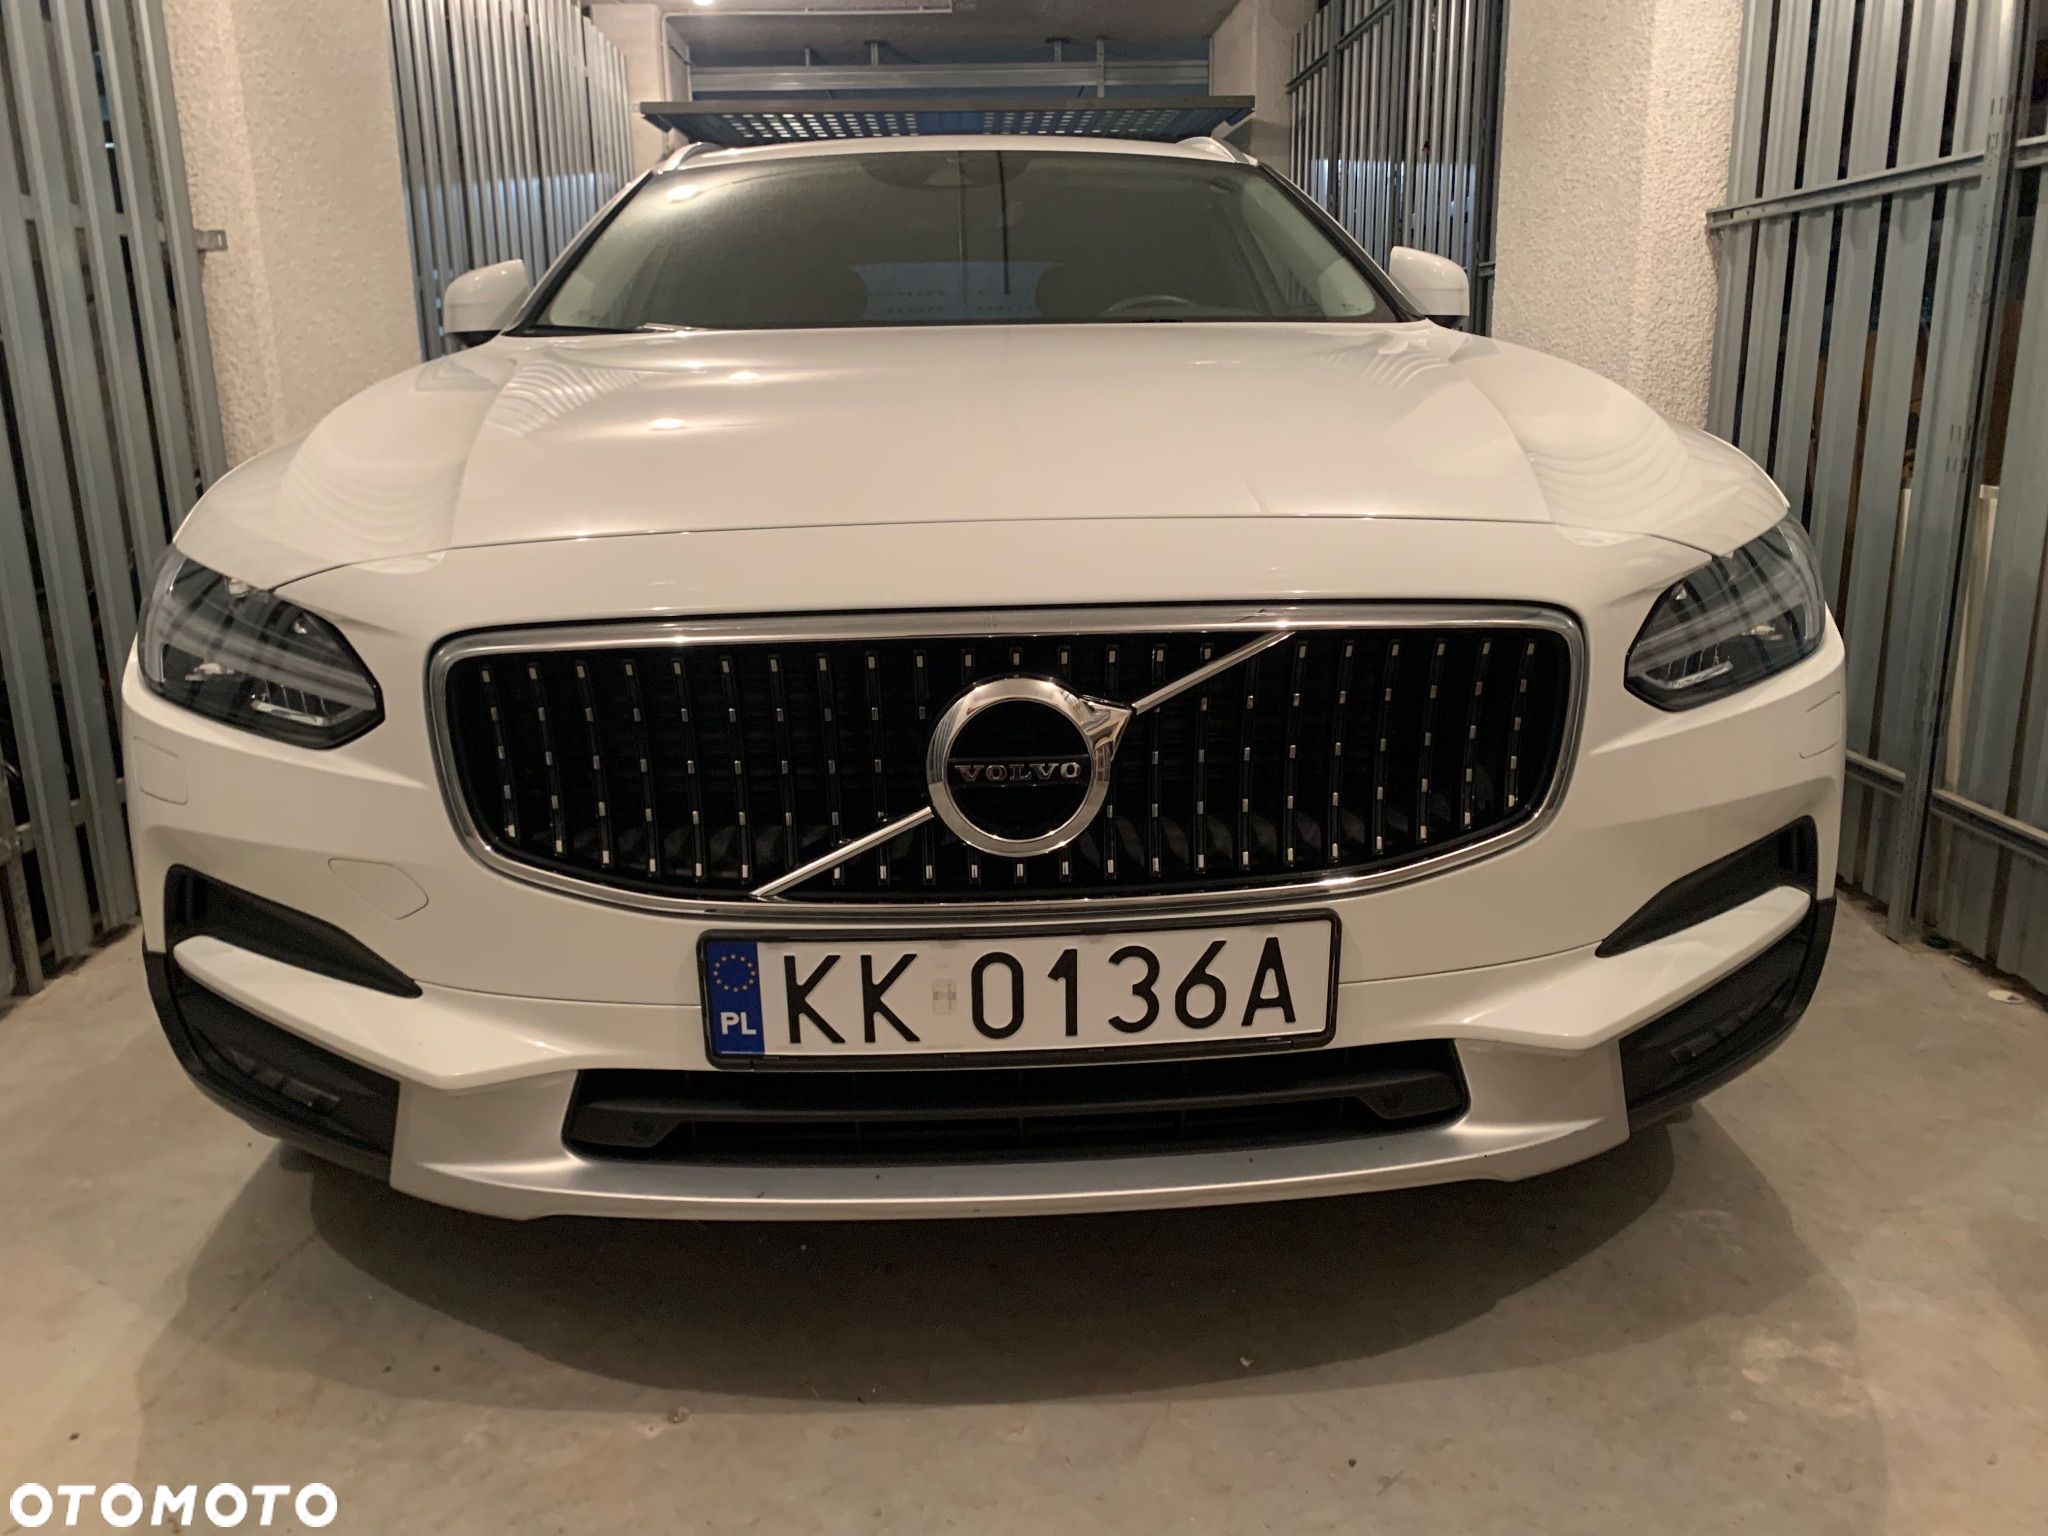 Volvo V90 Cross Country D4 AWD Geartronic - 1